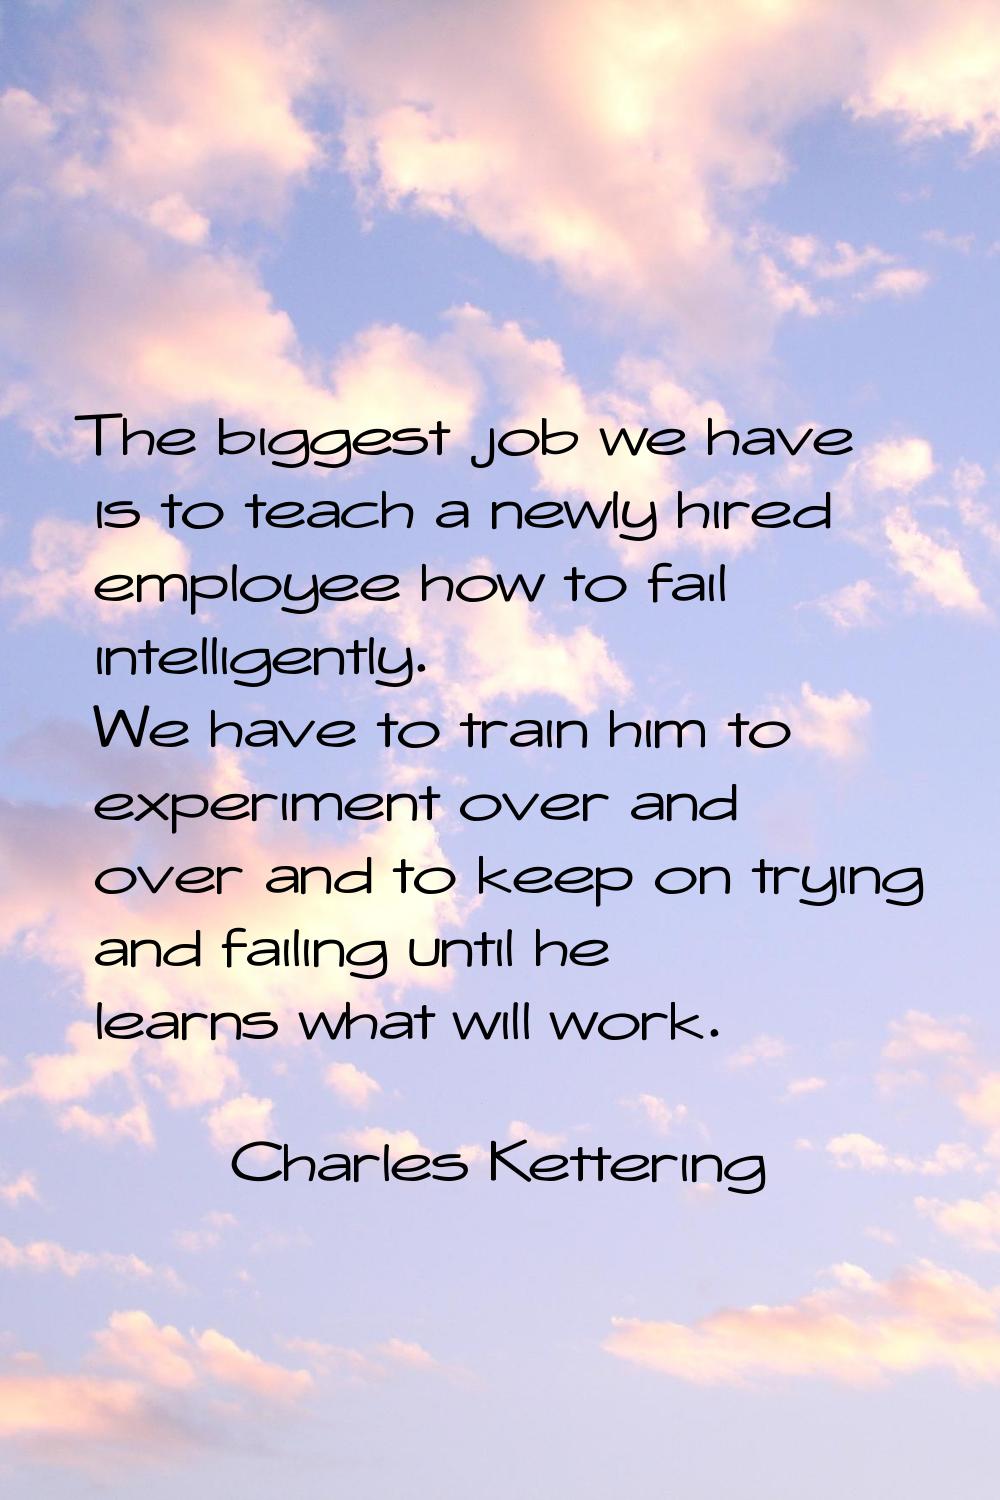 The biggest job we have is to teach a newly hired employee how to fail intelligently. We have to tr